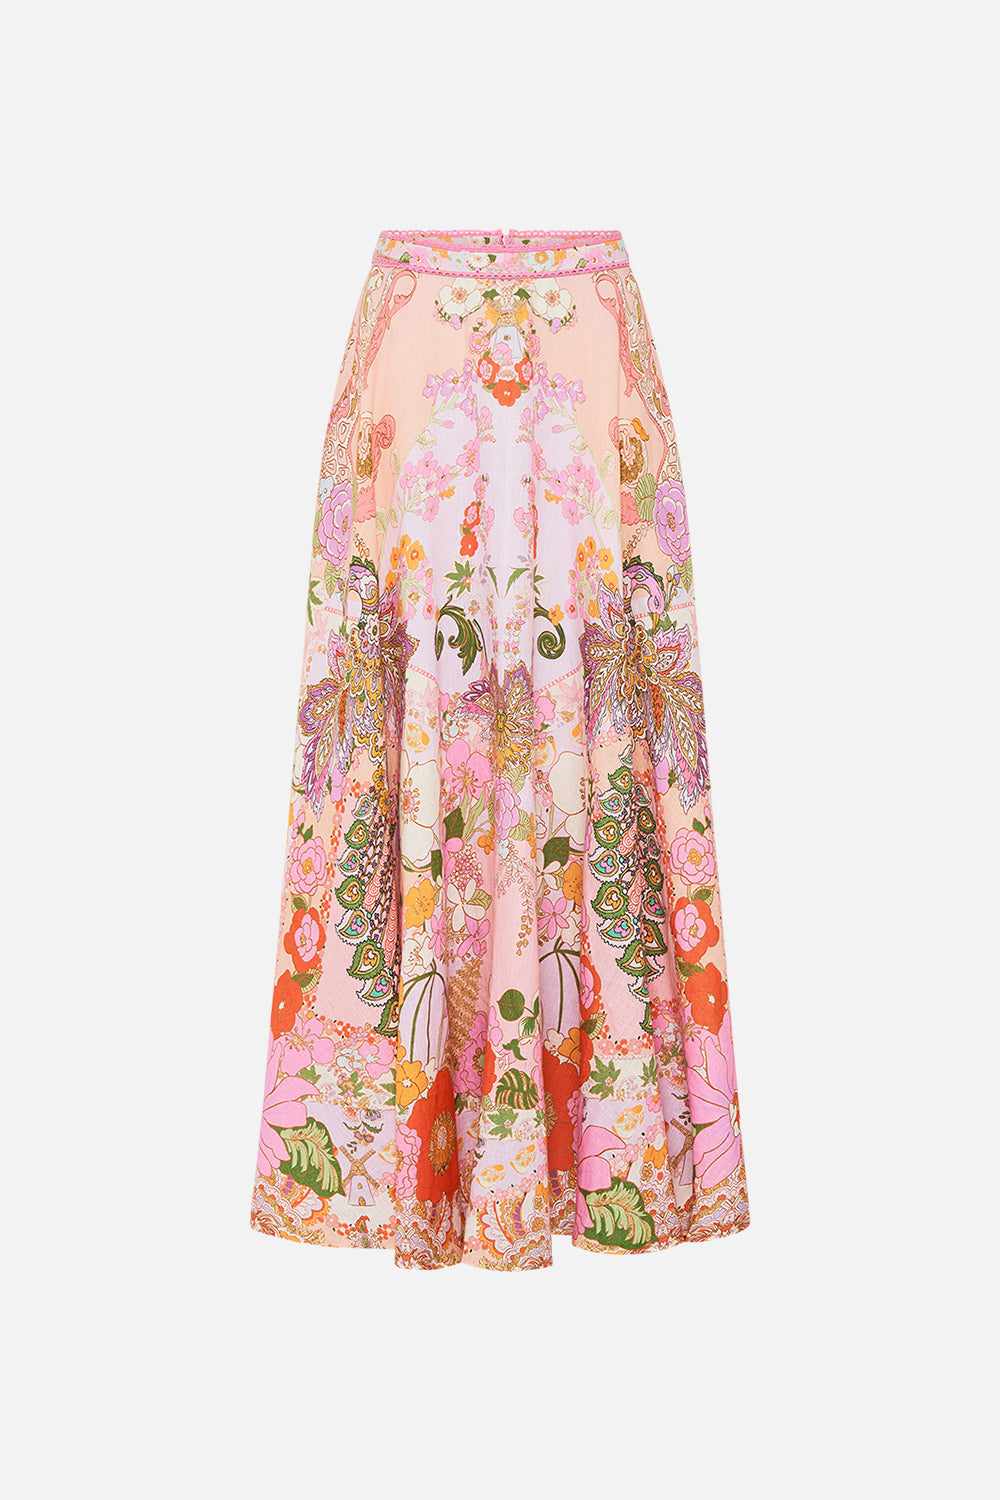 CAMILLA floral print maxi skirt in Clever Clogs print